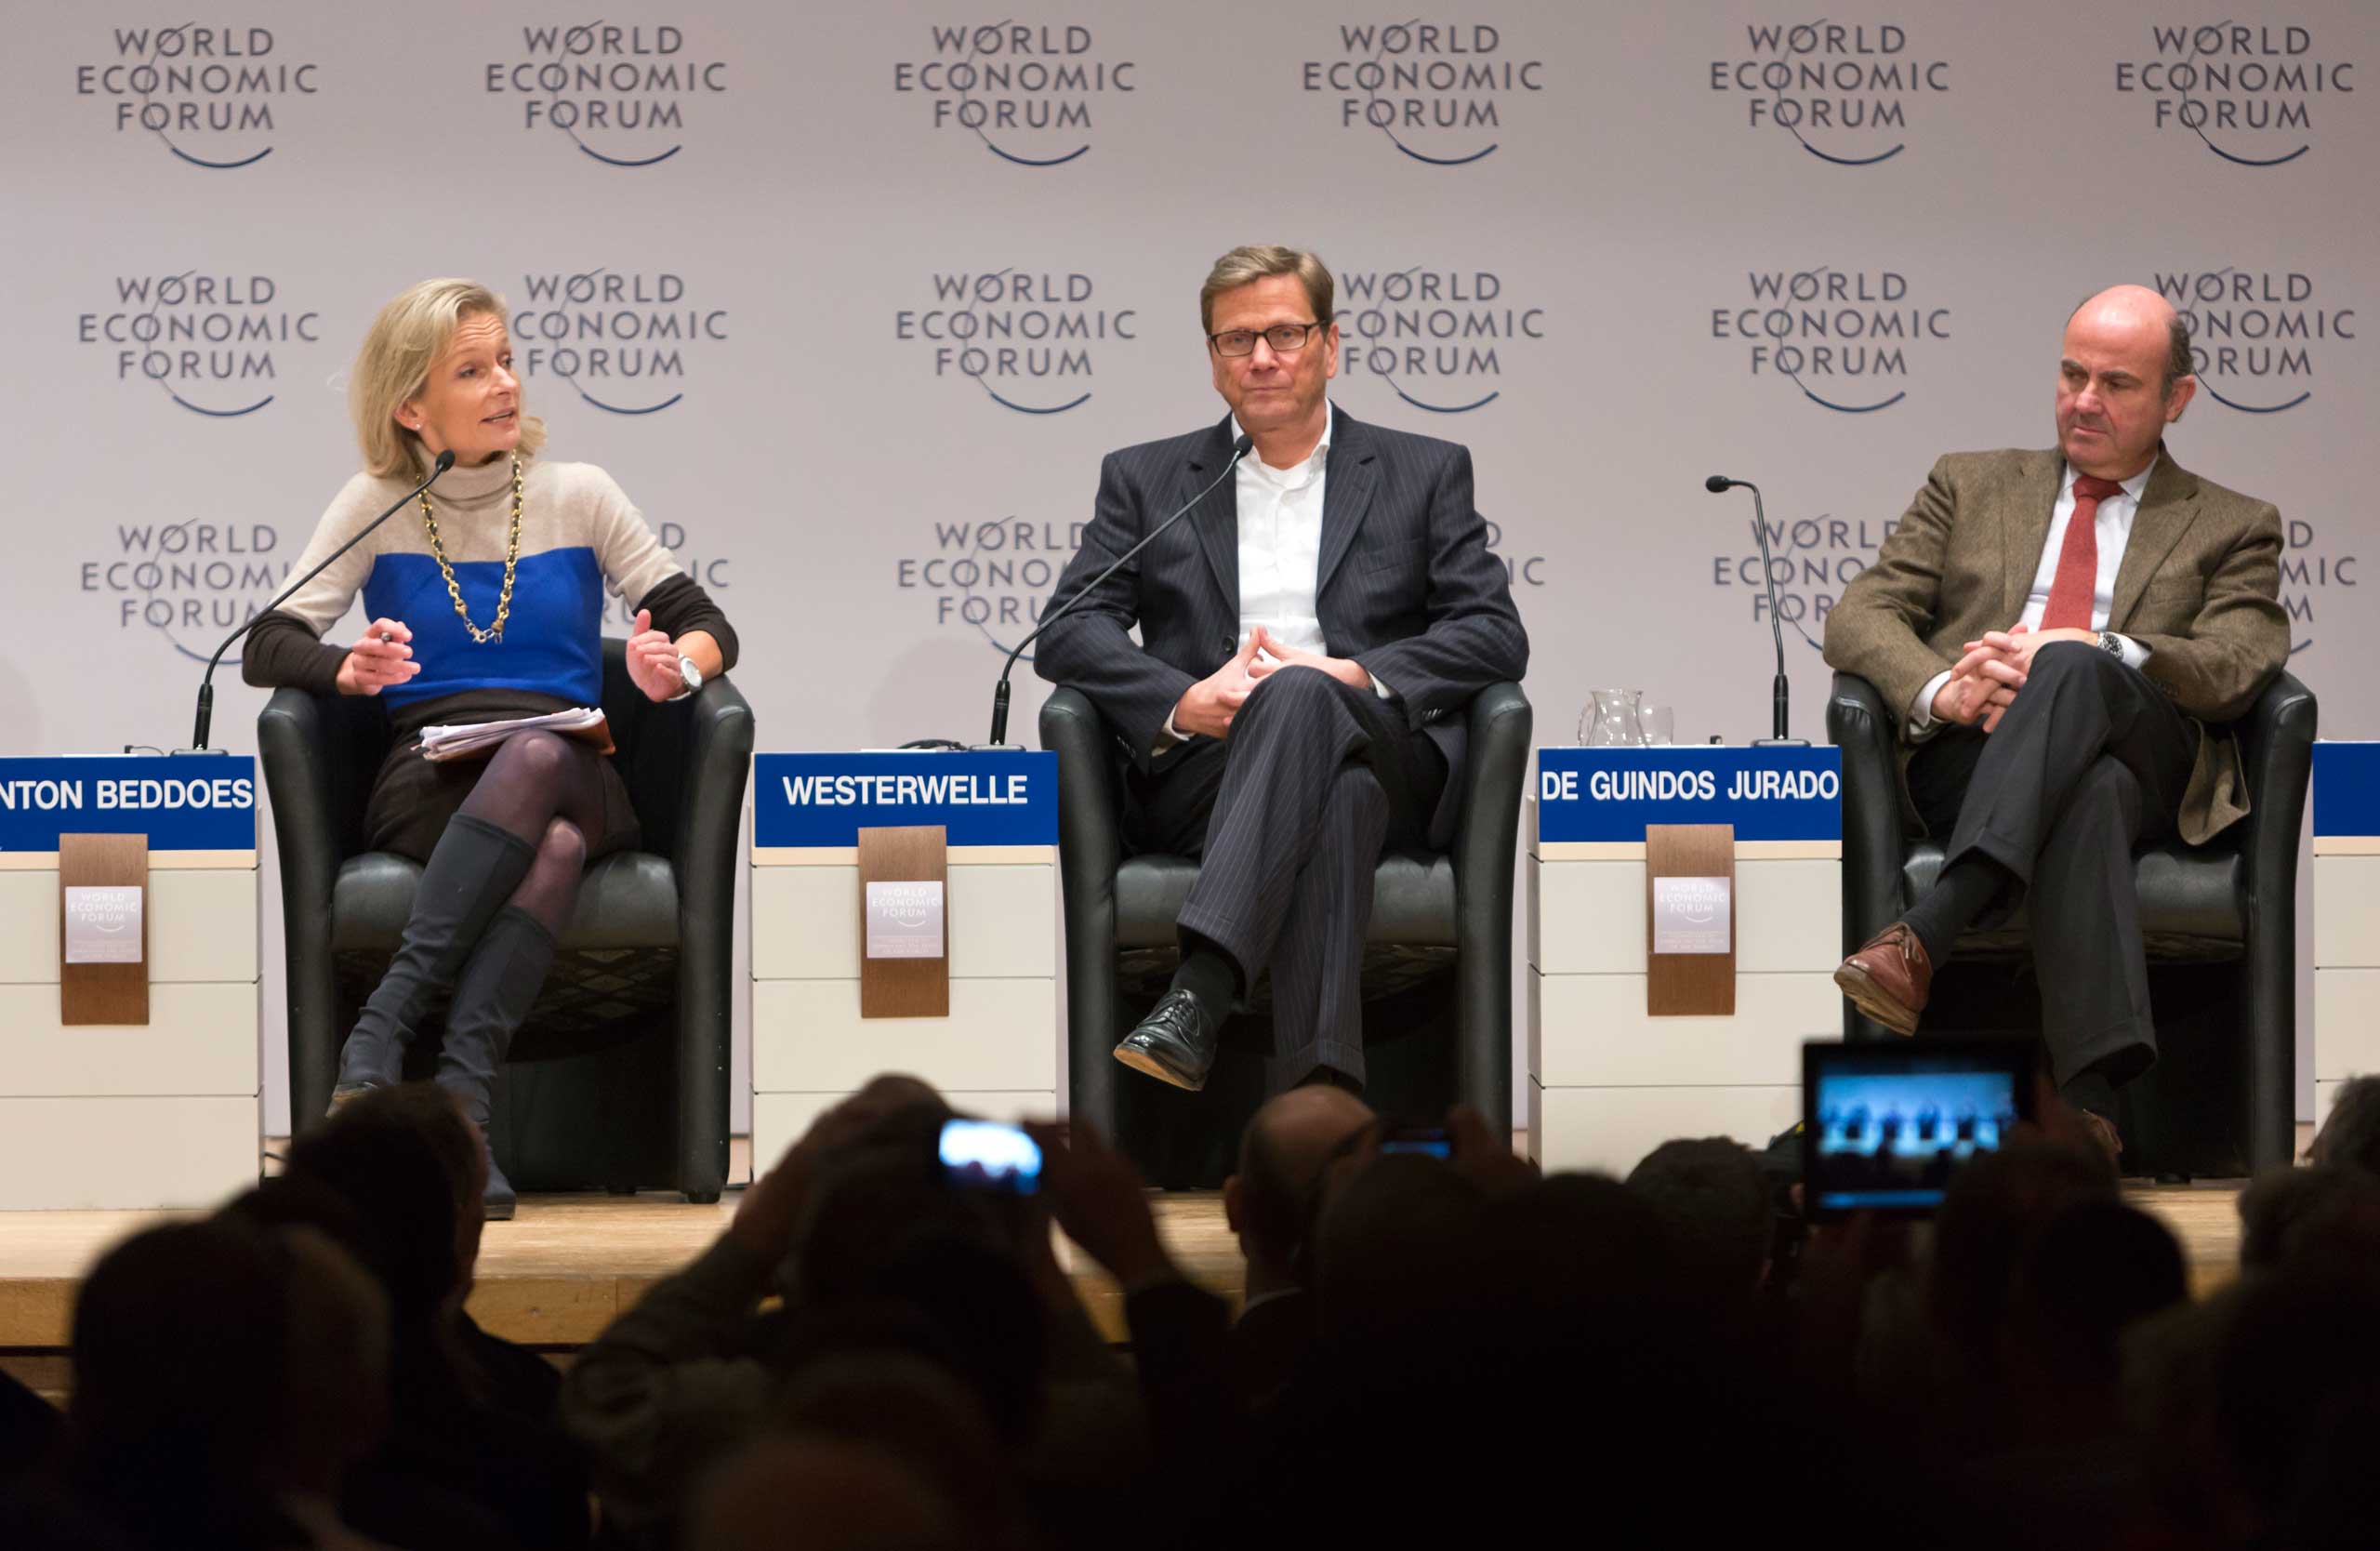 German Foreign Minister Westerwelle Attends The World Economic Forum